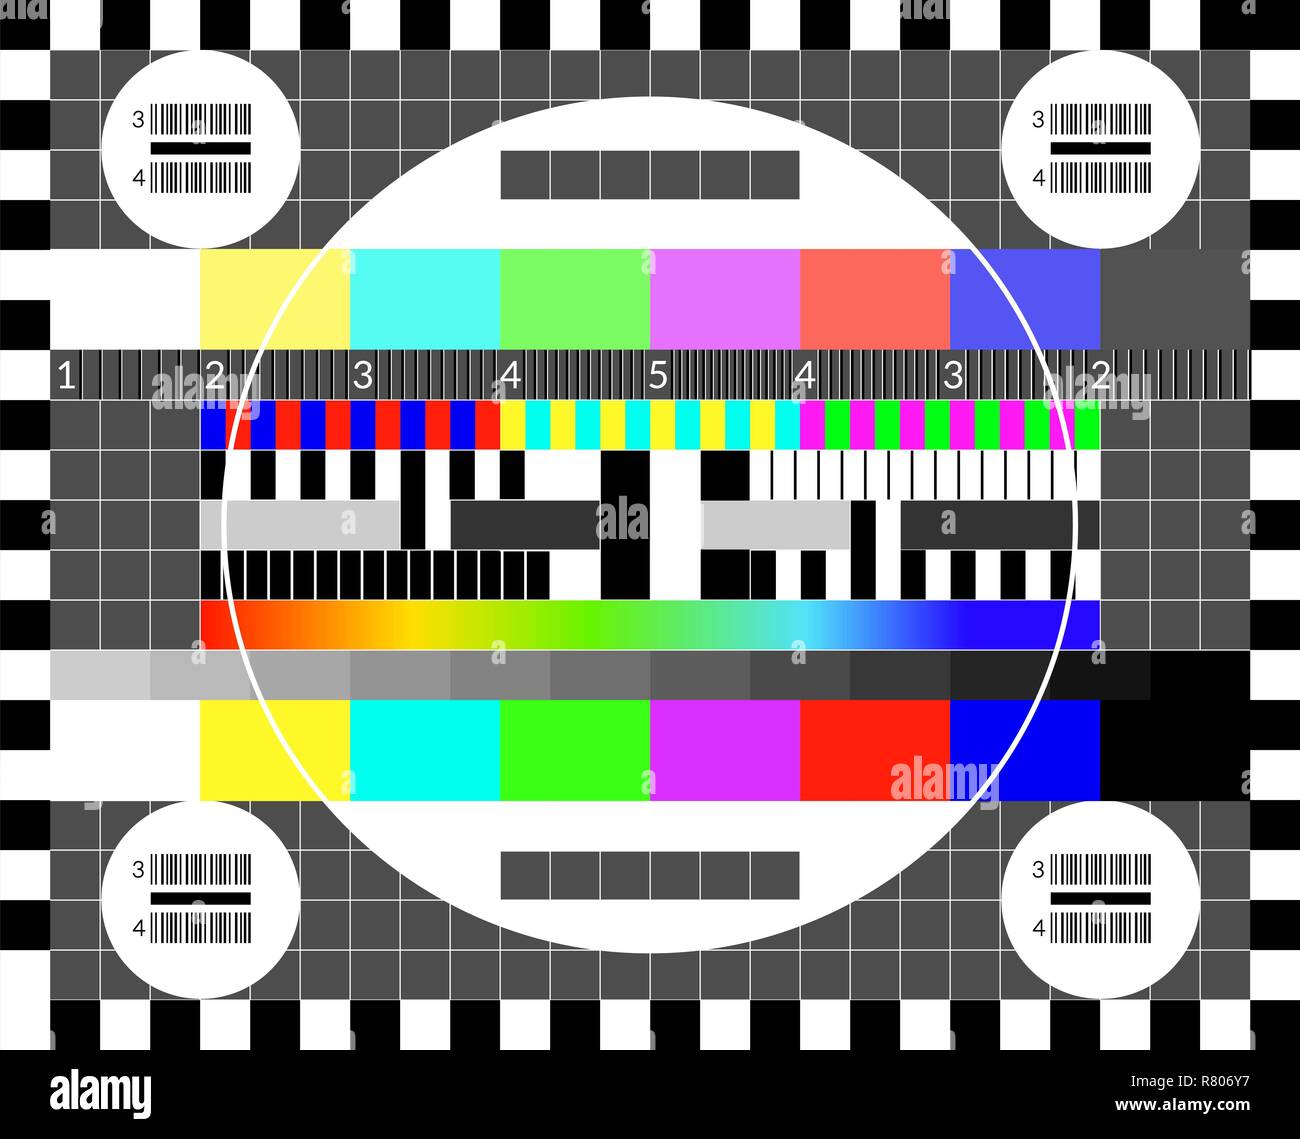 Retro tv test screen. Old calibration chip chart pattern Stock Vector